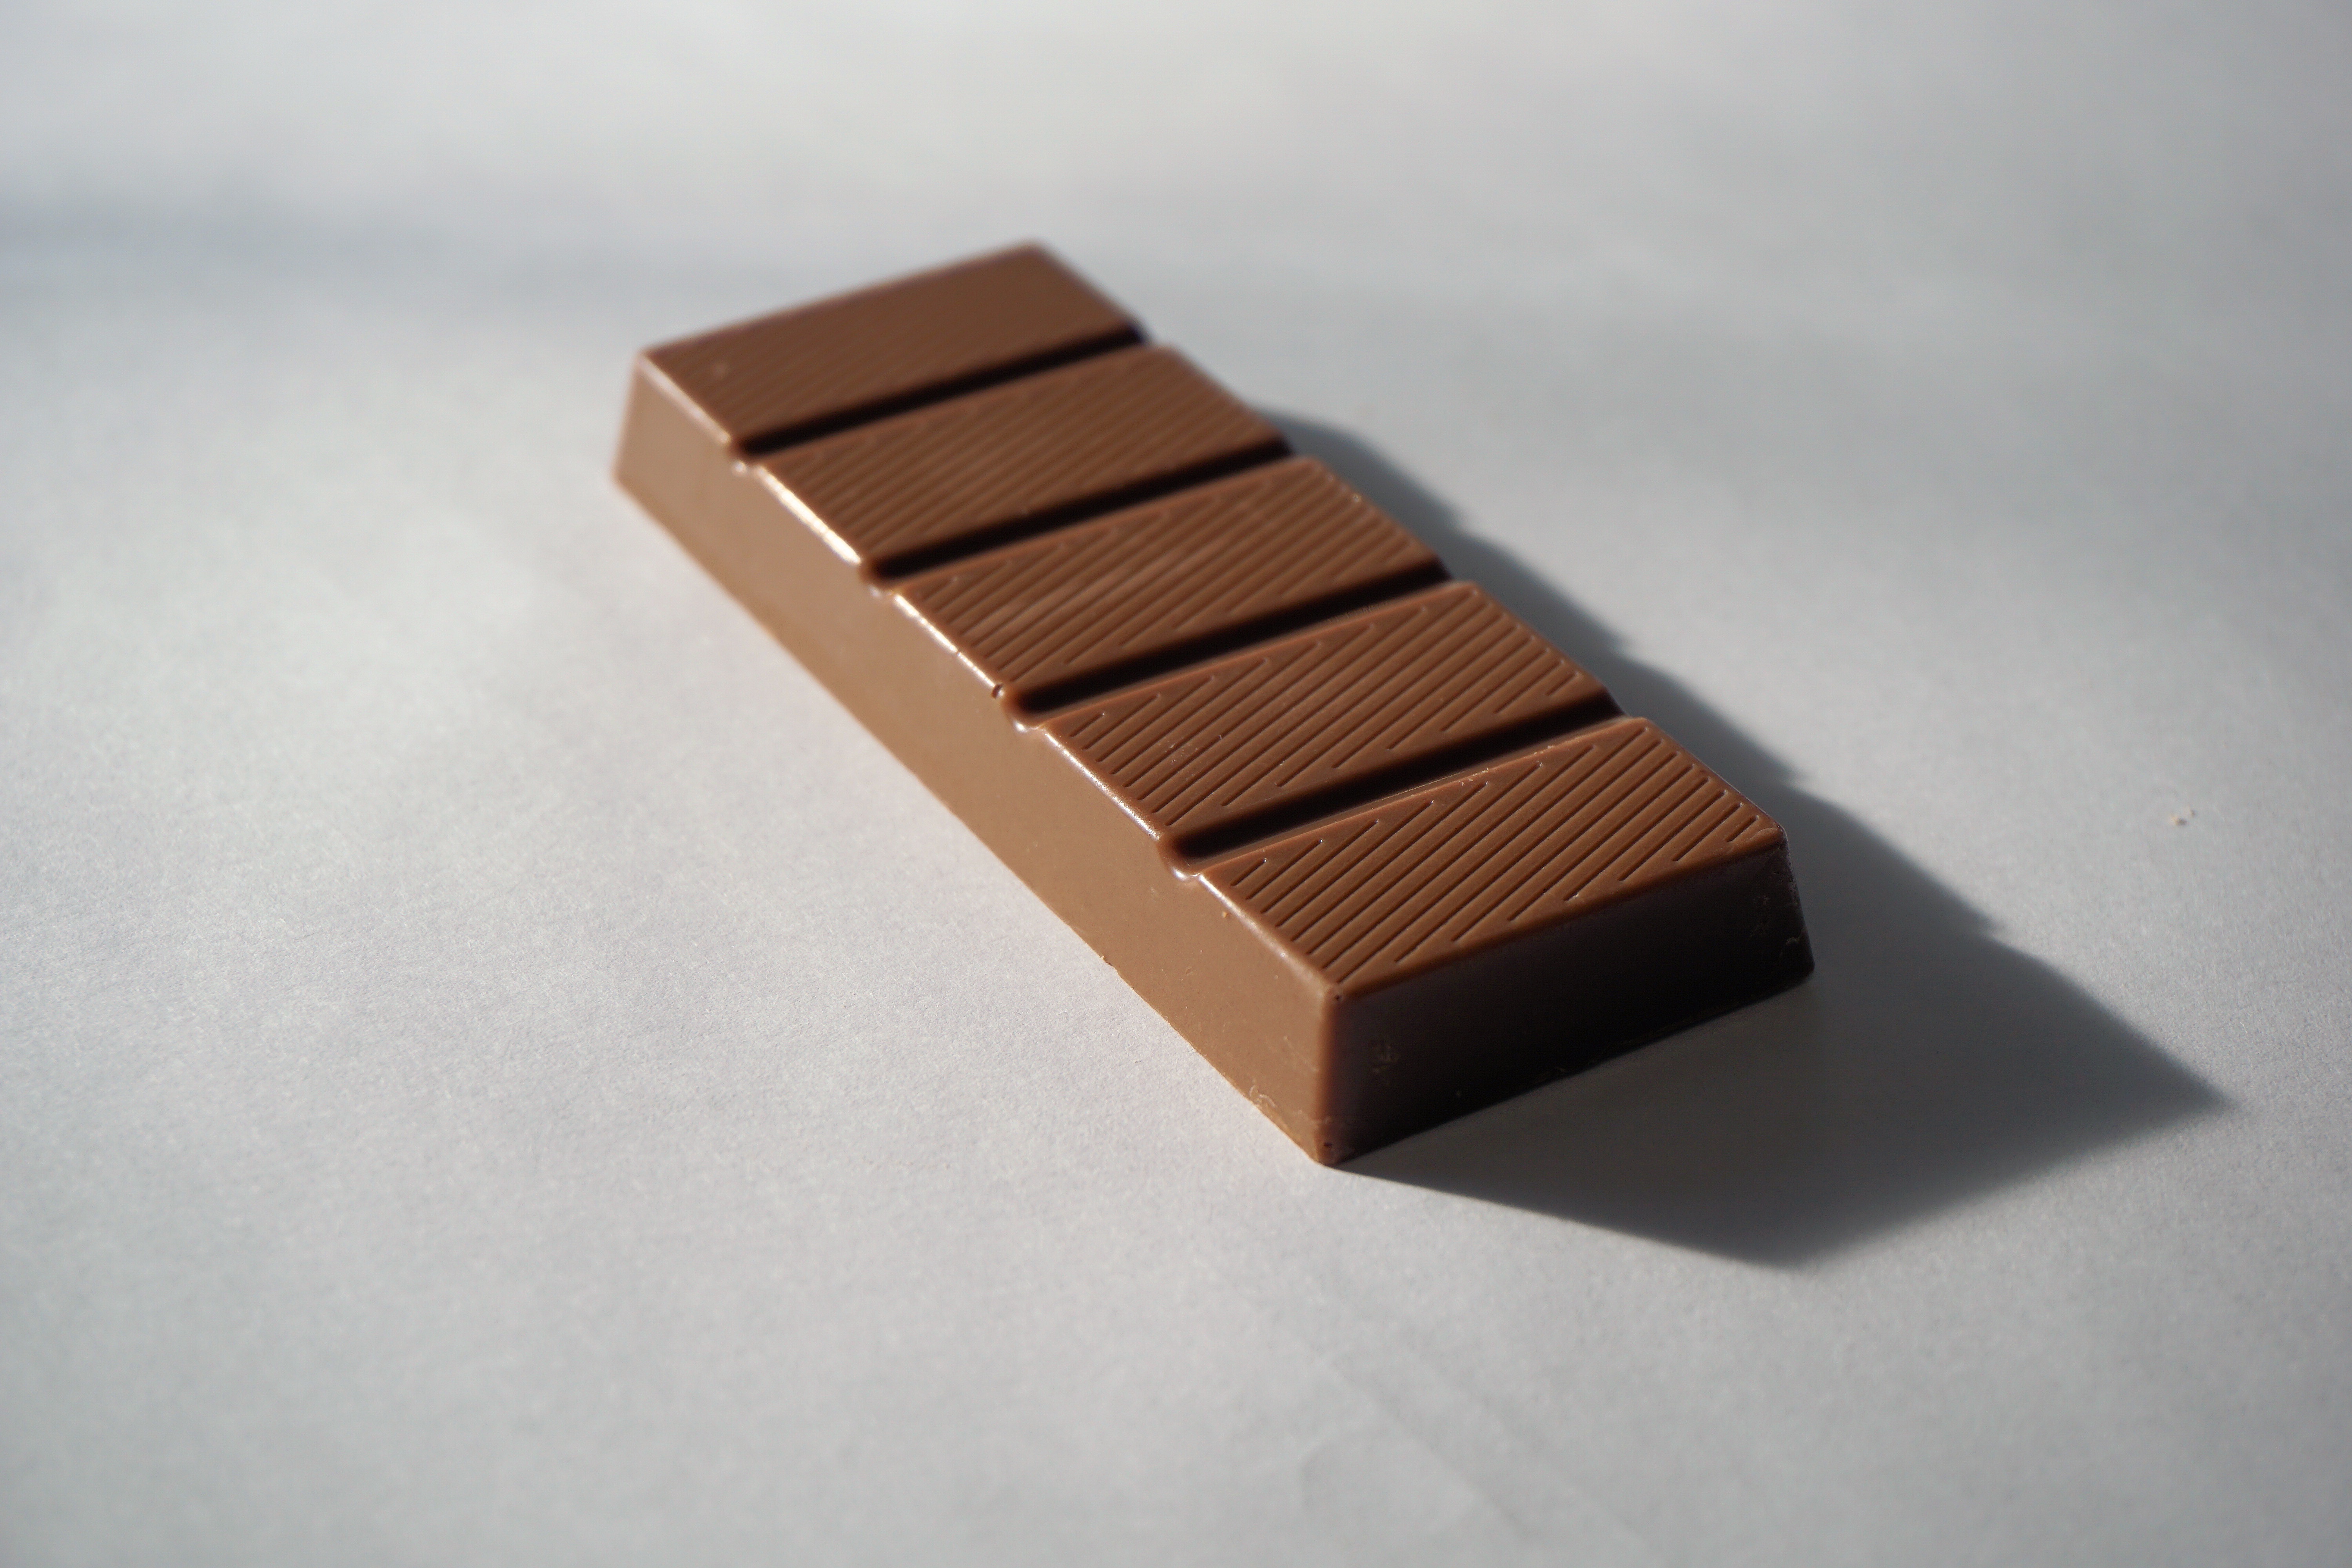 A small bar of chocolate